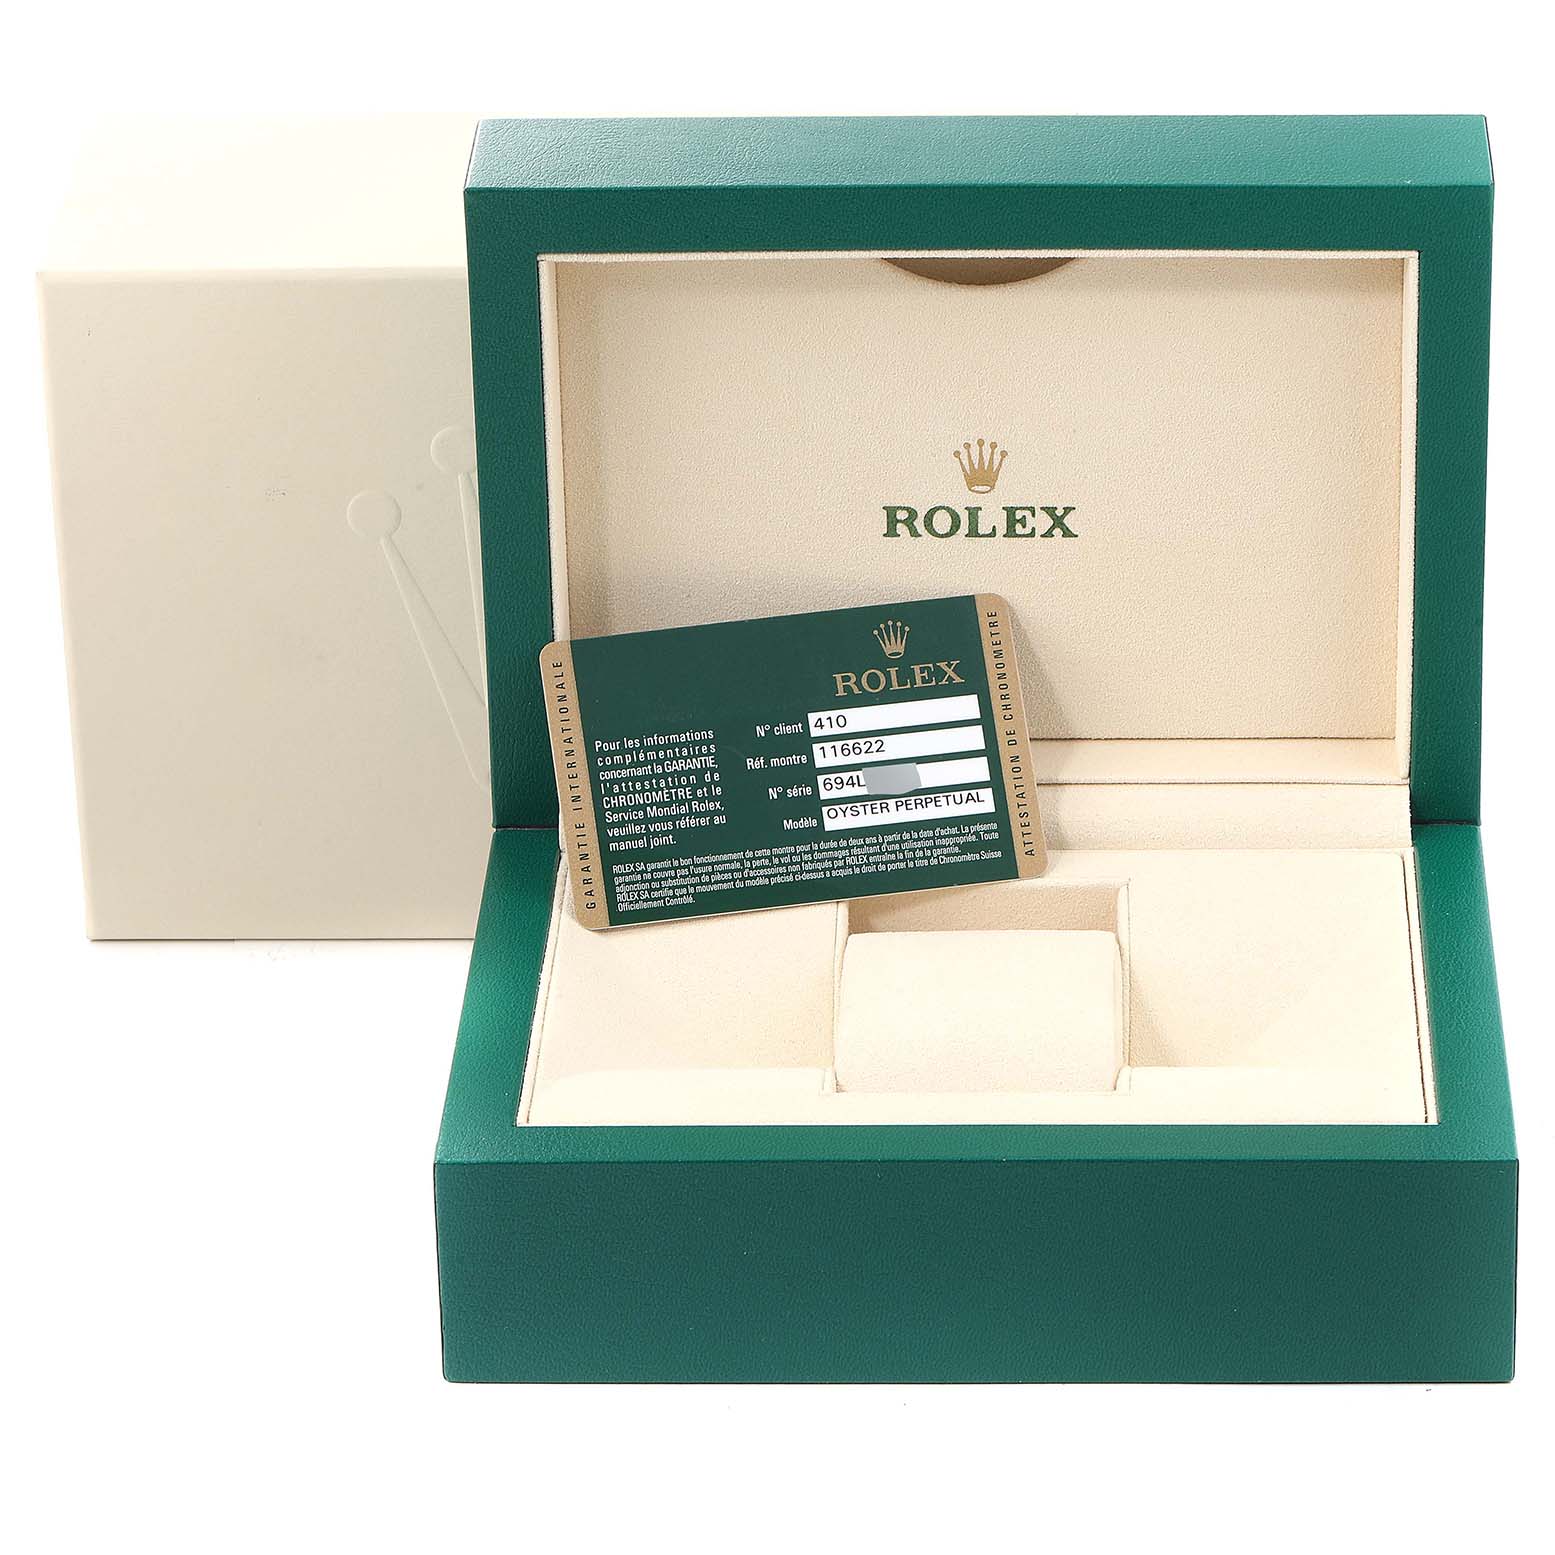 Rolex Box and Card details